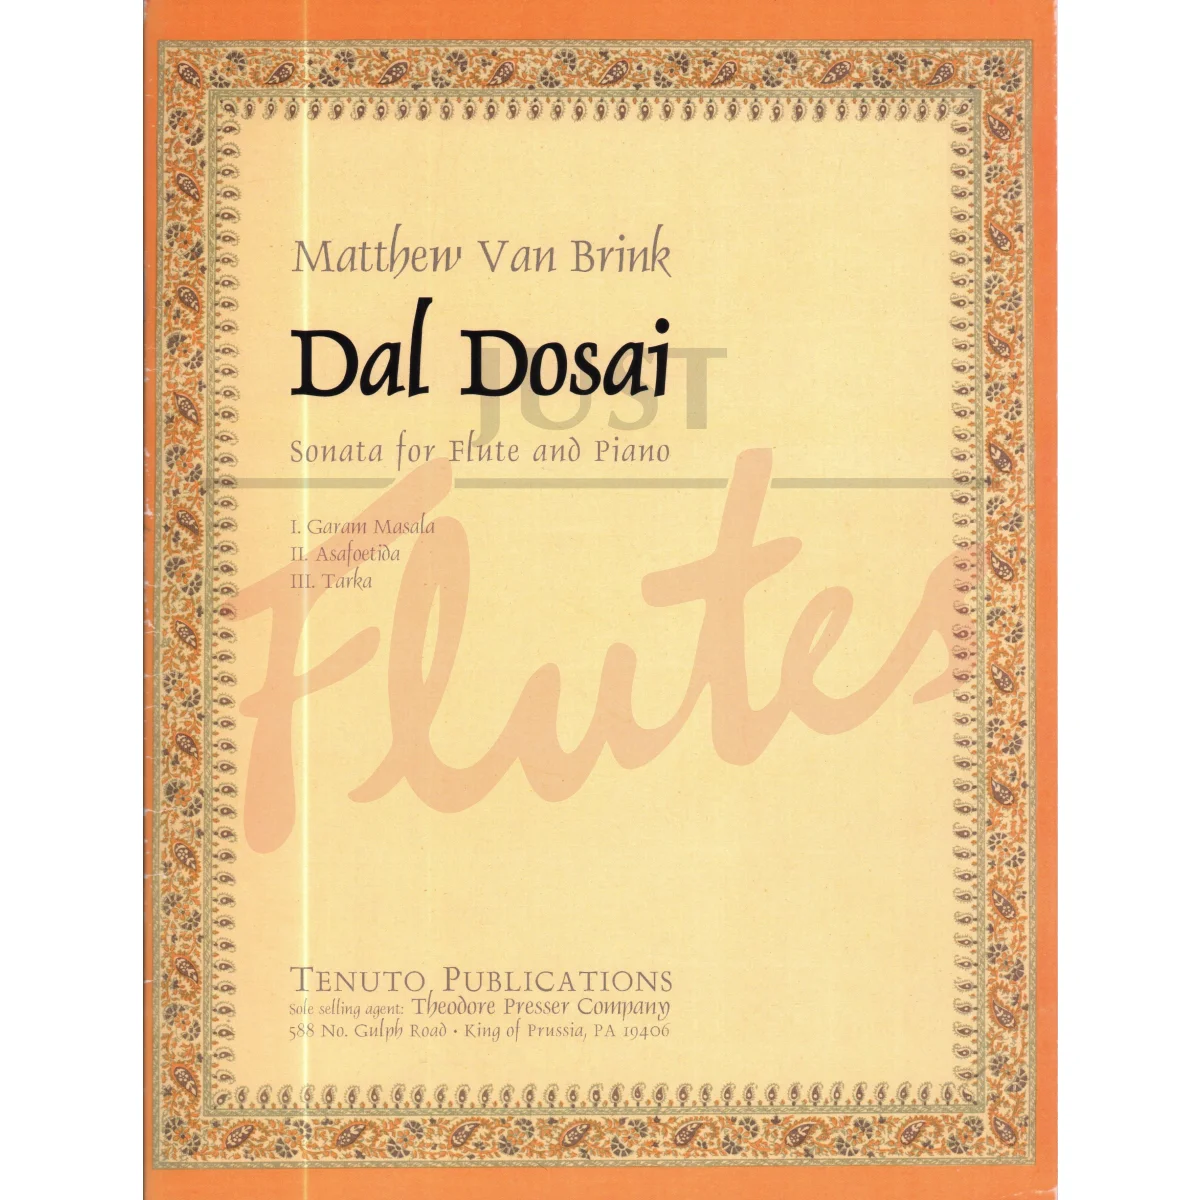 Dal Dosai for Flute and Piano